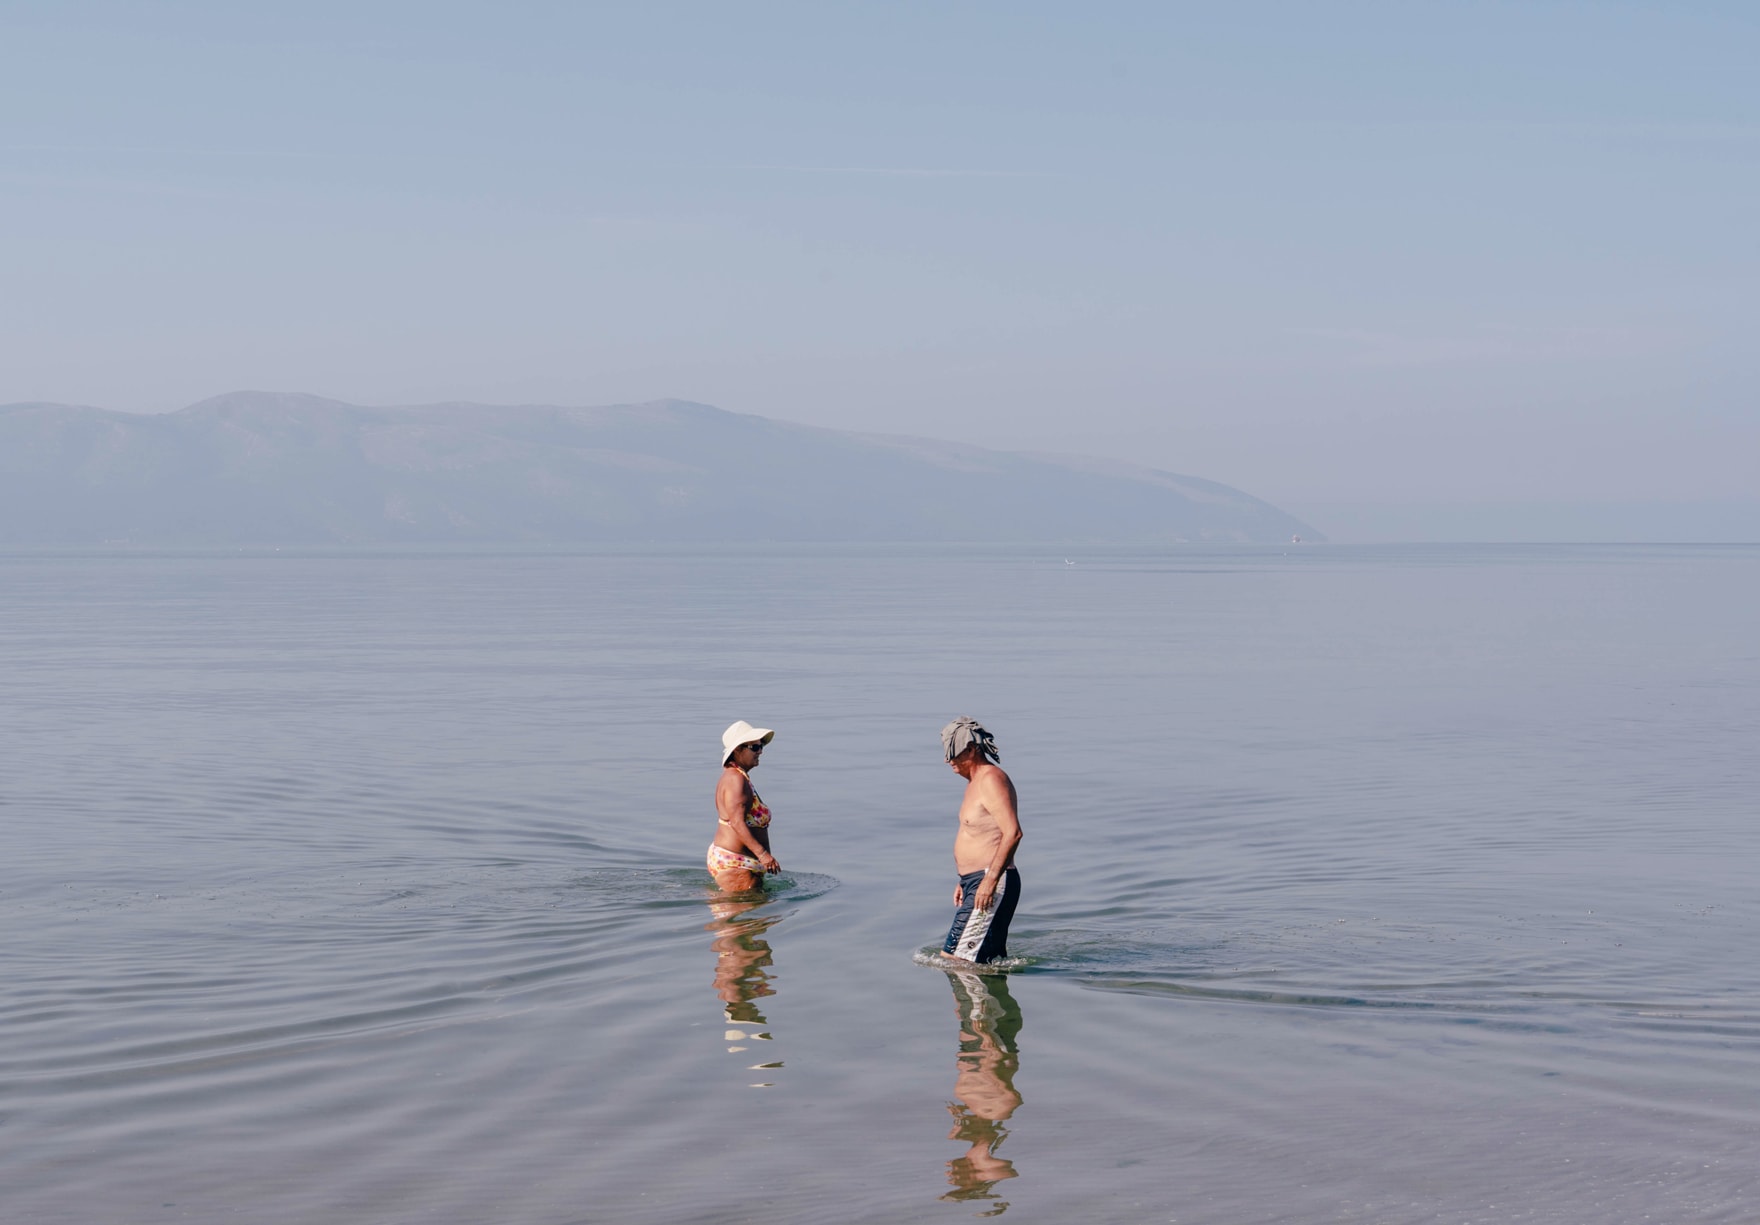 A man and a woman cross paths in the empty sea